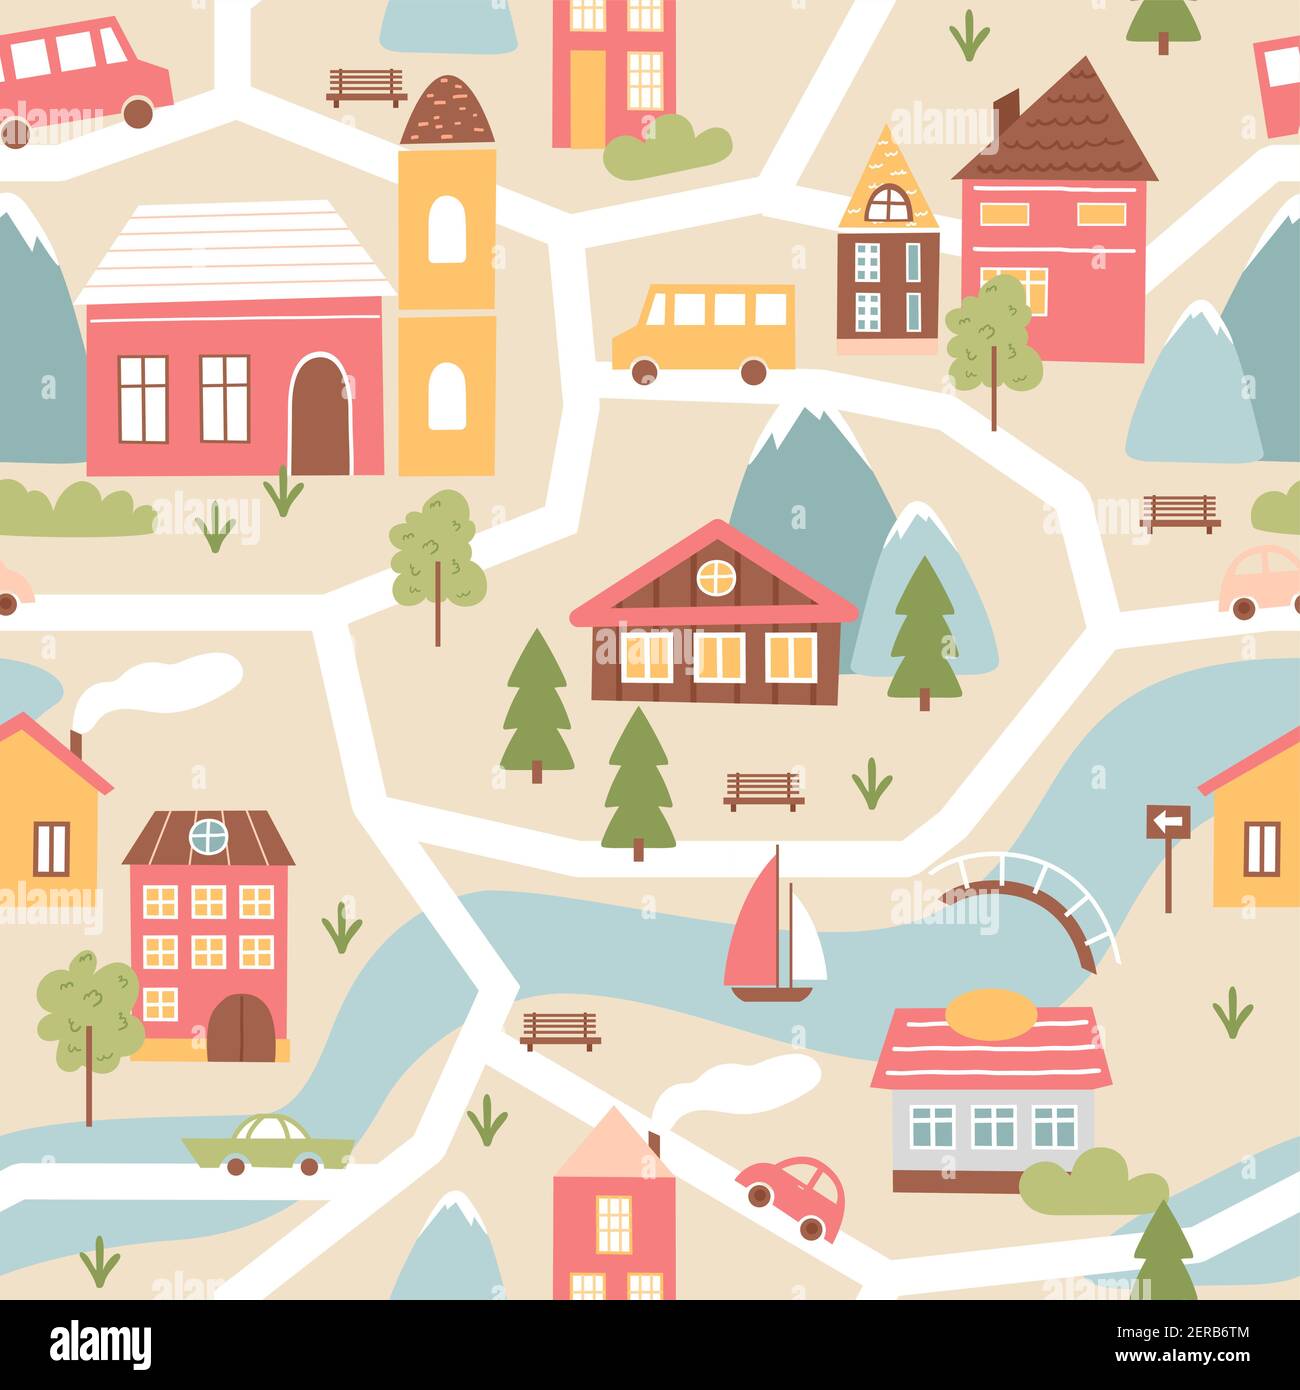 Village map Stock Vector Images - Alamy